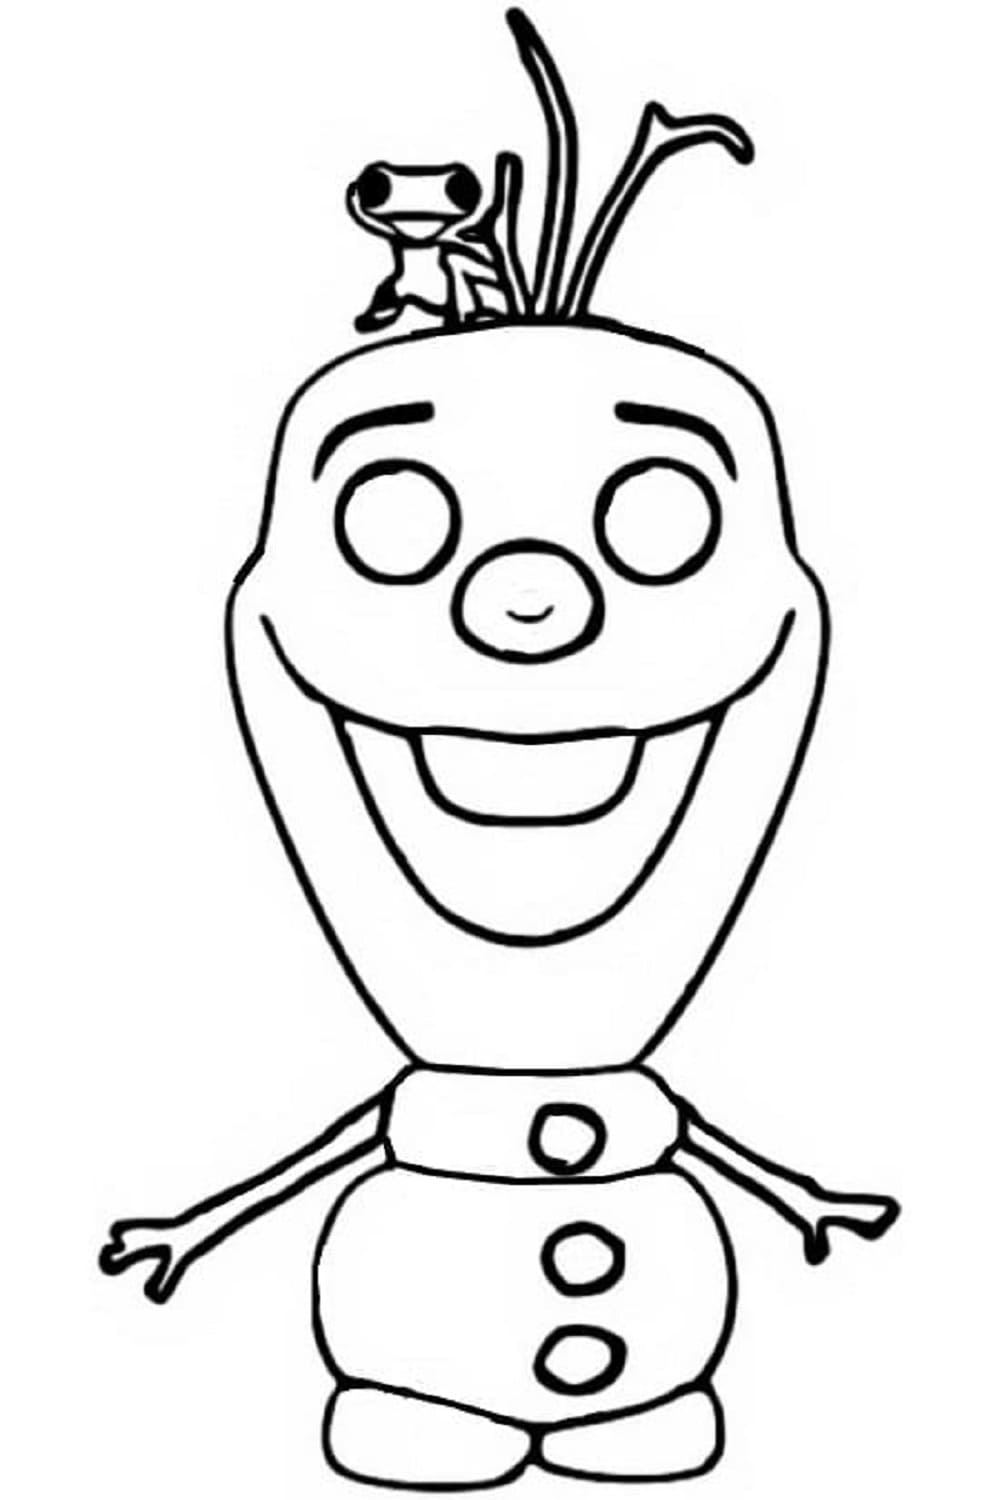 Printable Funko Pop Olaf Coloring Page